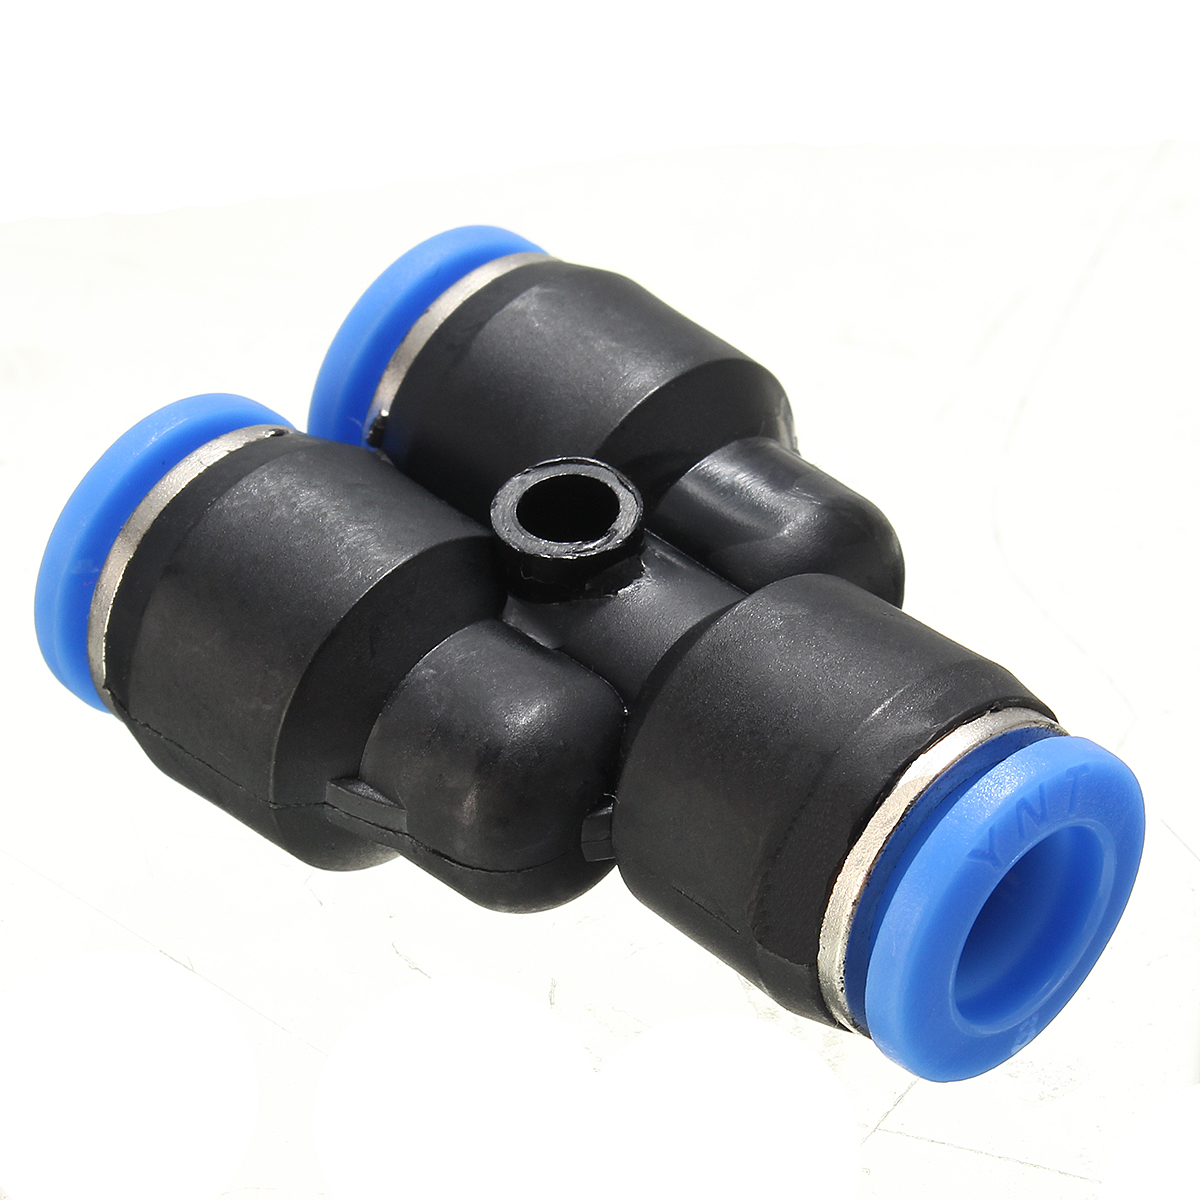 10pcs Y Union 1/4" Pneumatic Connector Push in Fitting For Air Hose Tube 6mm 